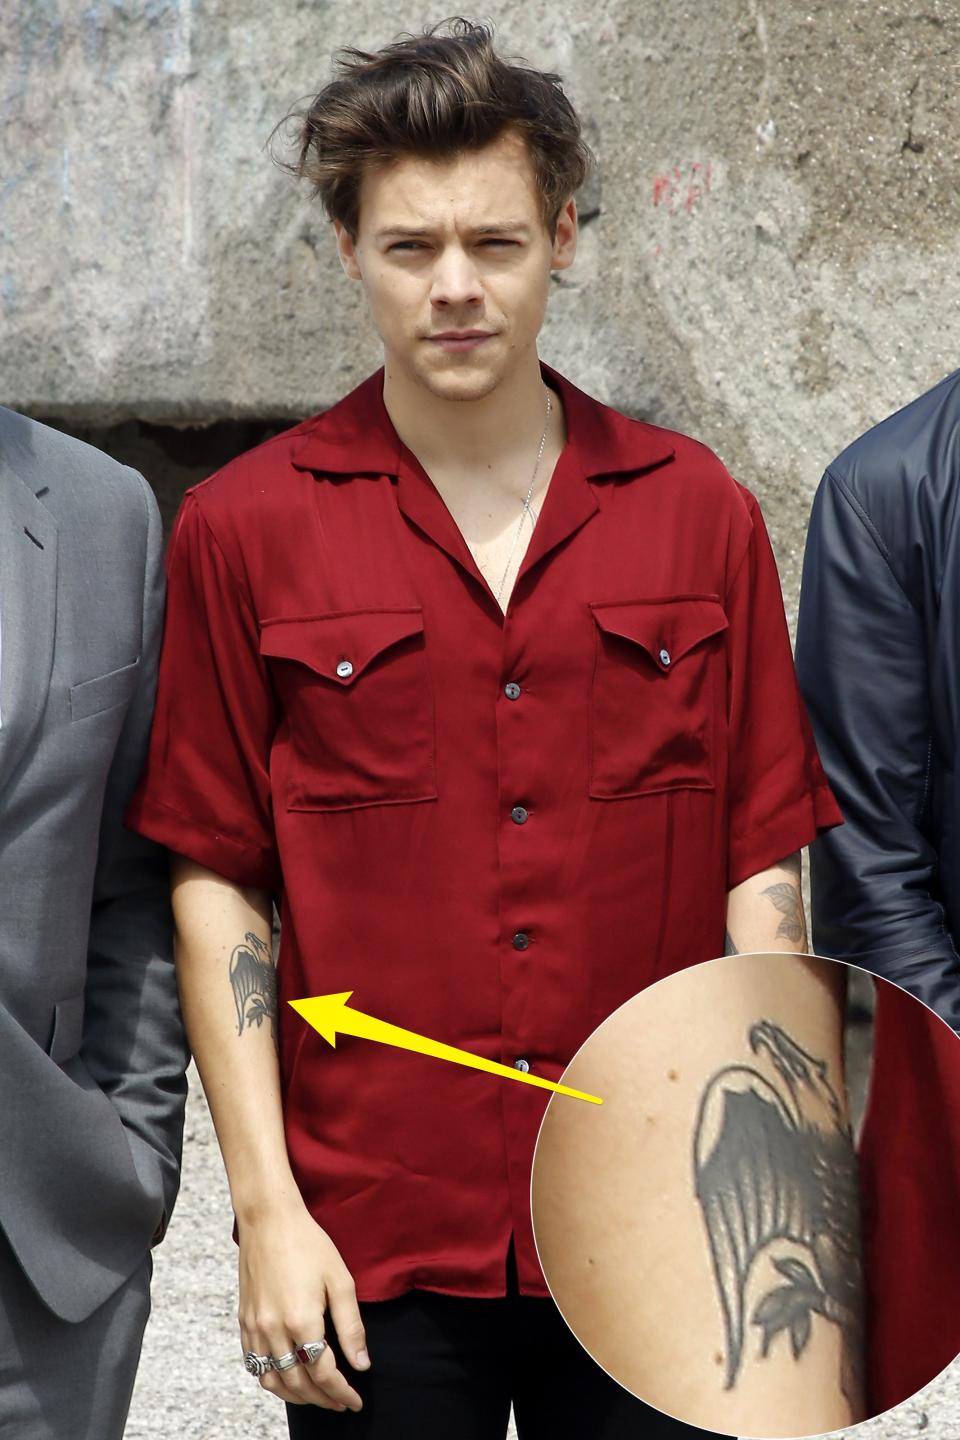 A yellow arrow pointing to Harry Styles' eagle tattoo on his right arm.